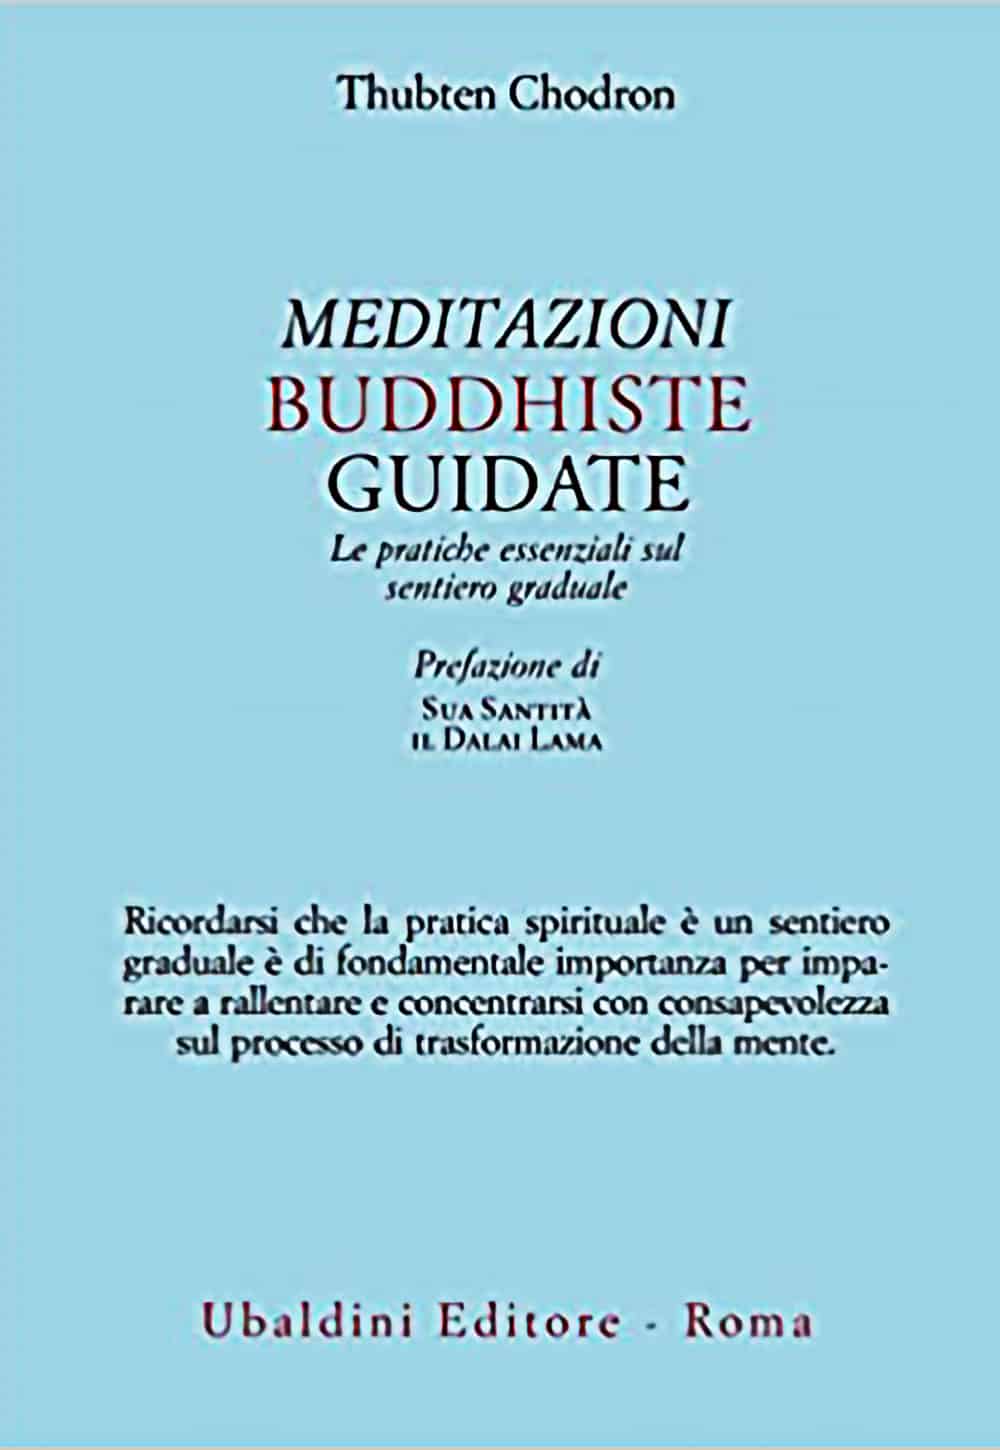 Cover of Guided Buddhist Meditations translation in Italian